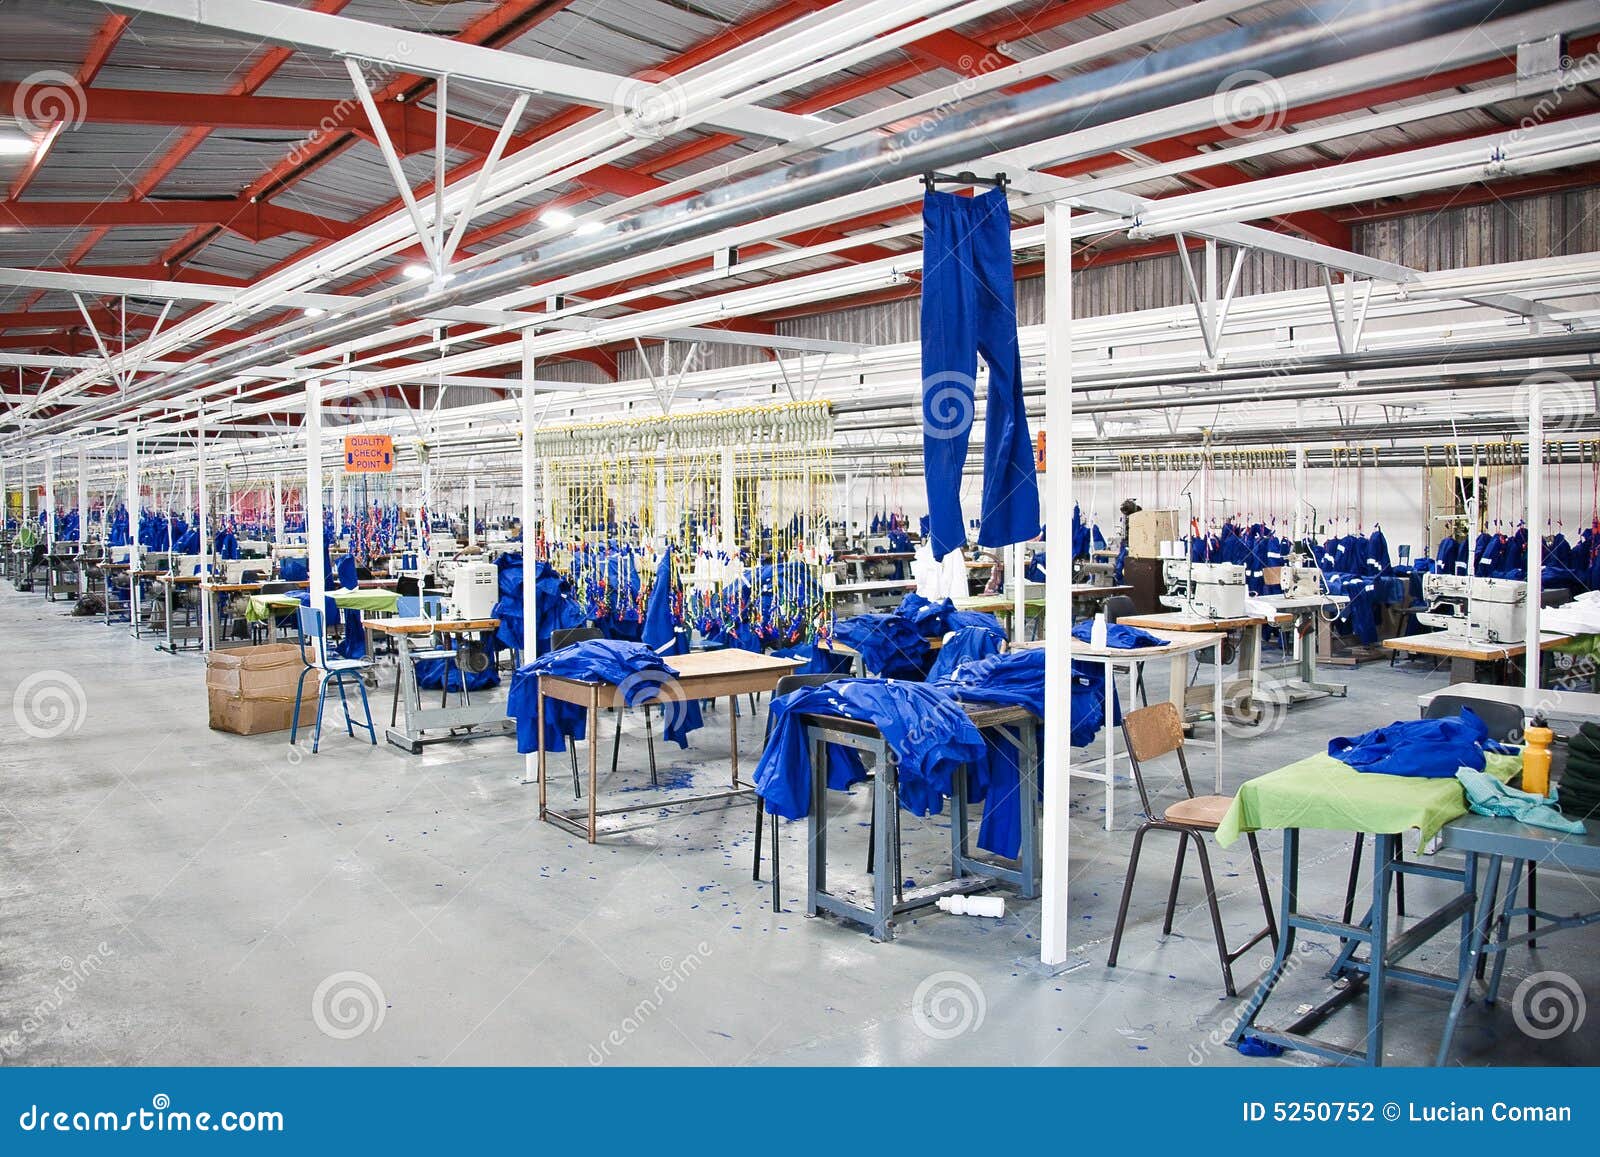 industrial textile factory